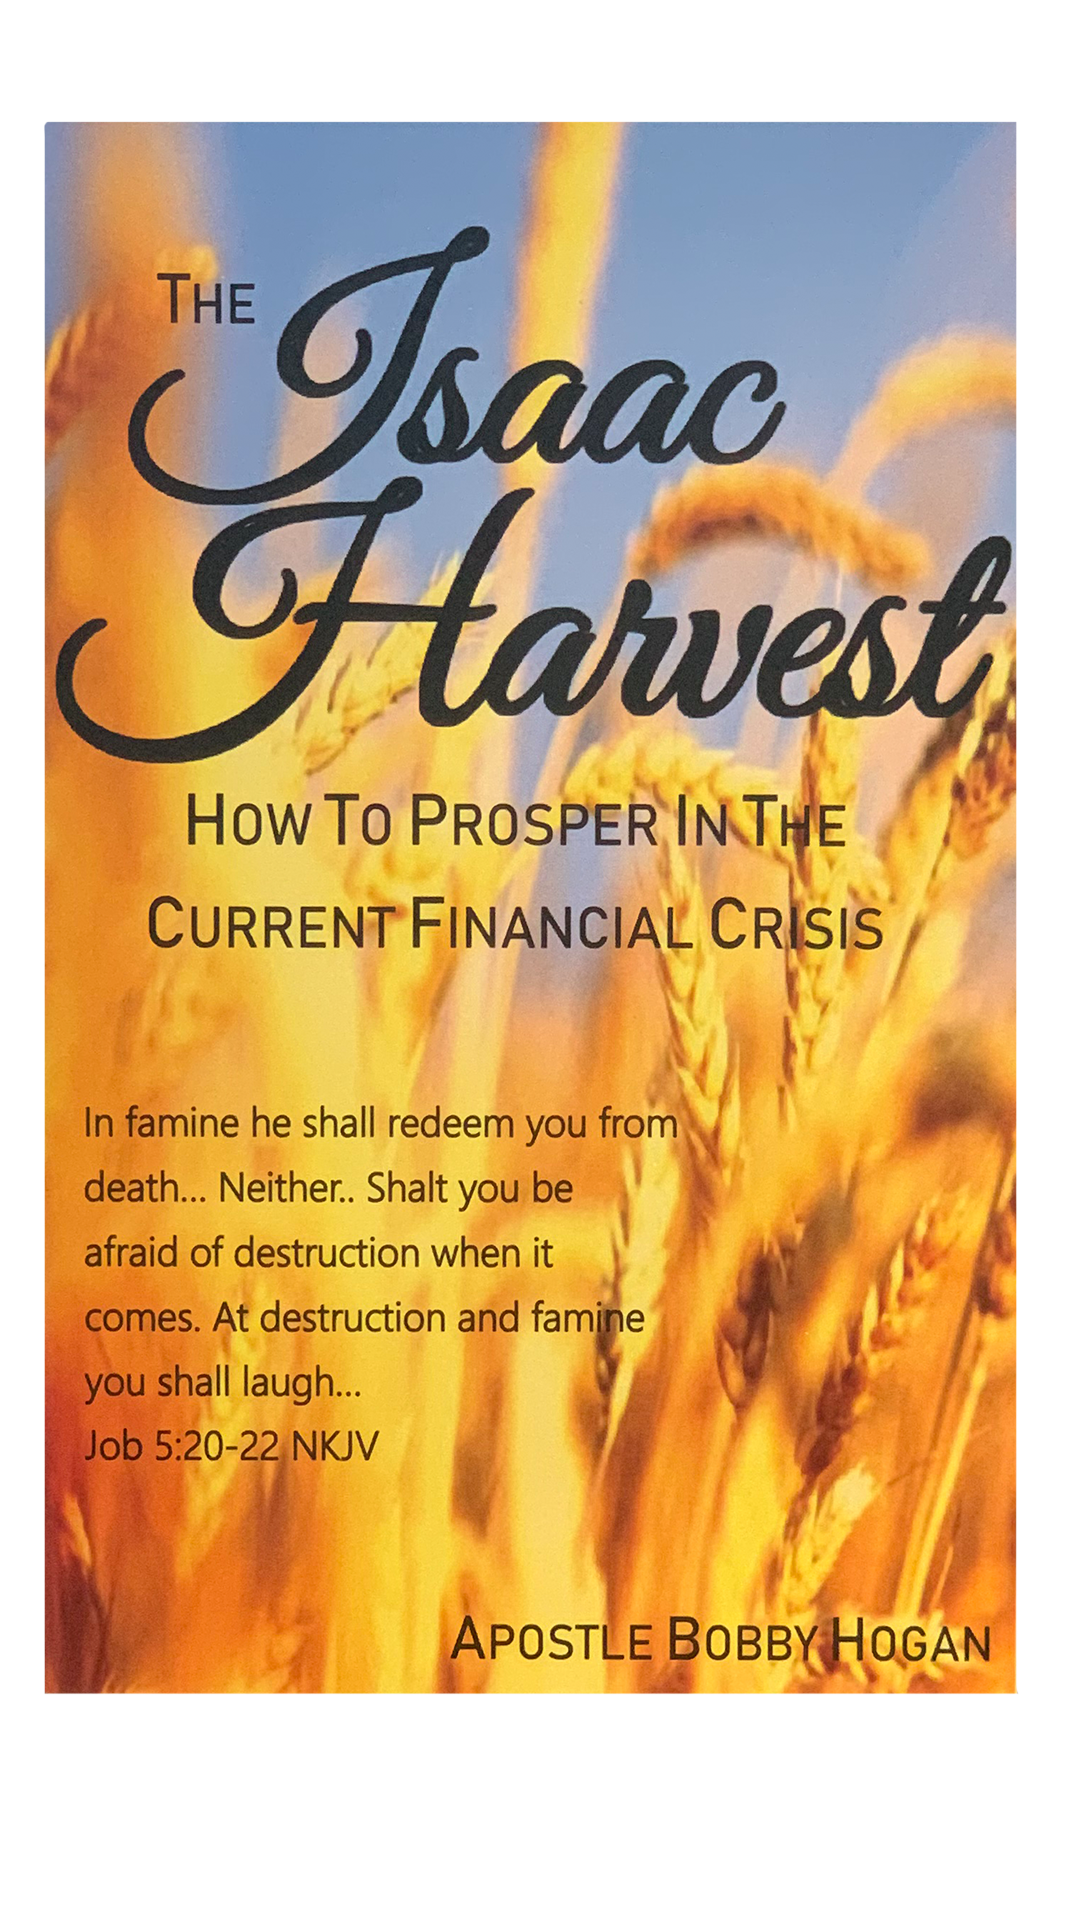 The Isaac Harvest - How to Prosper in the Current Financial Crisis